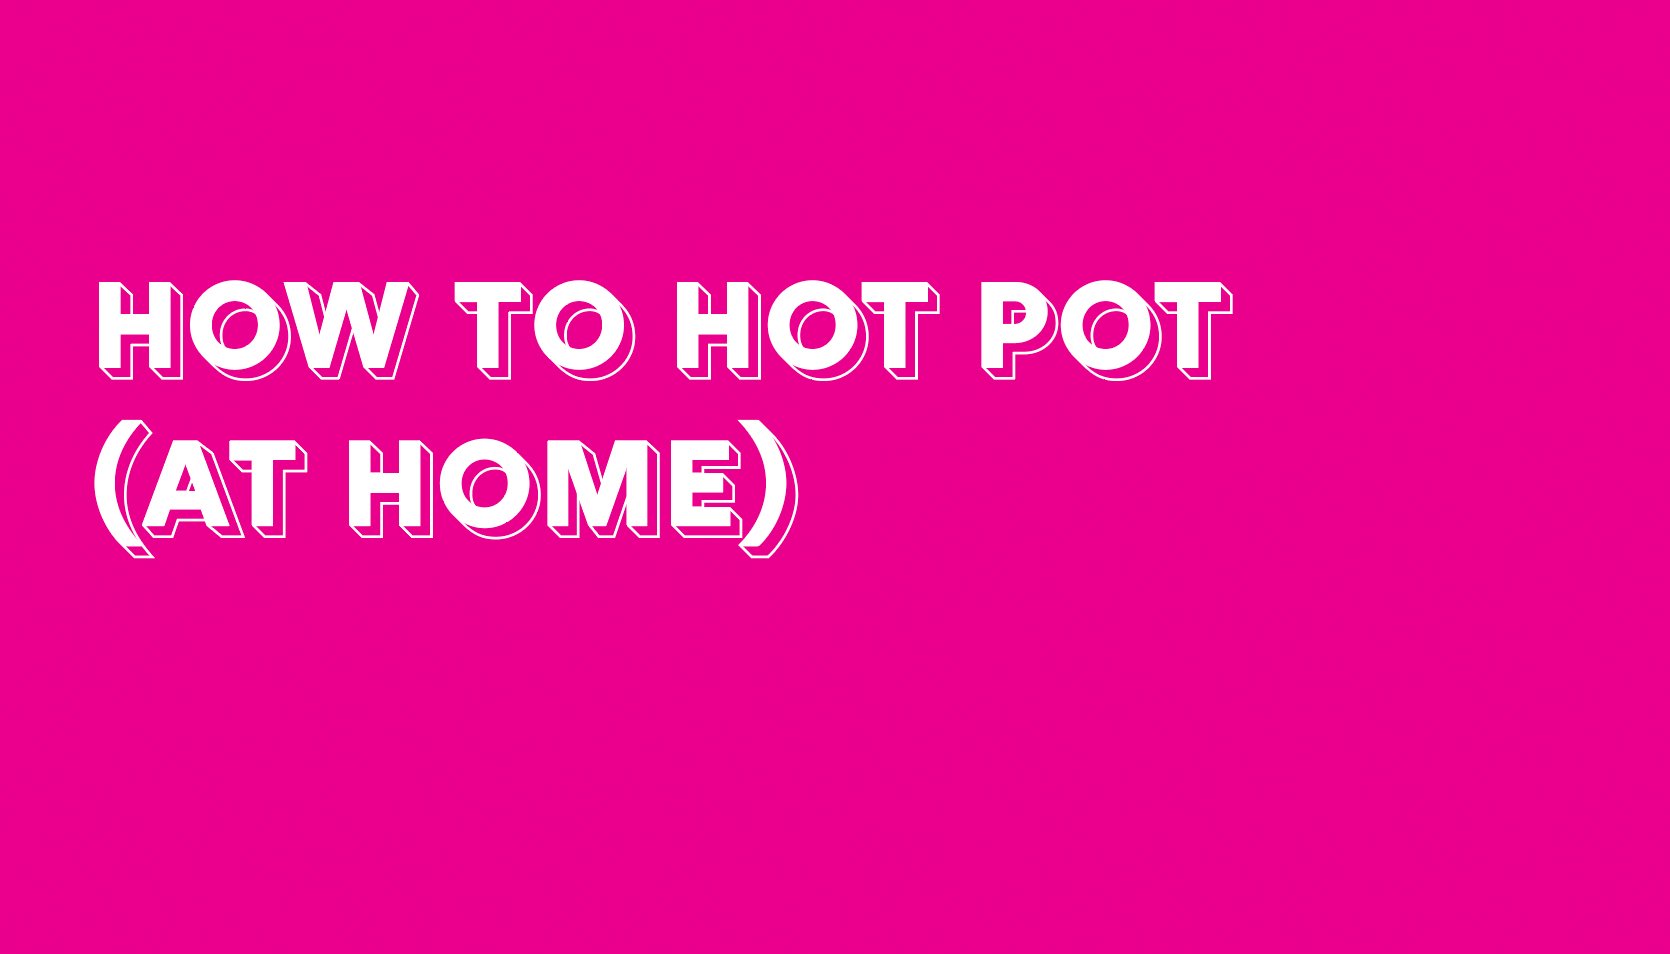 Try Hot Pot at Home with These Tips and Tricks - Sunset Magazine